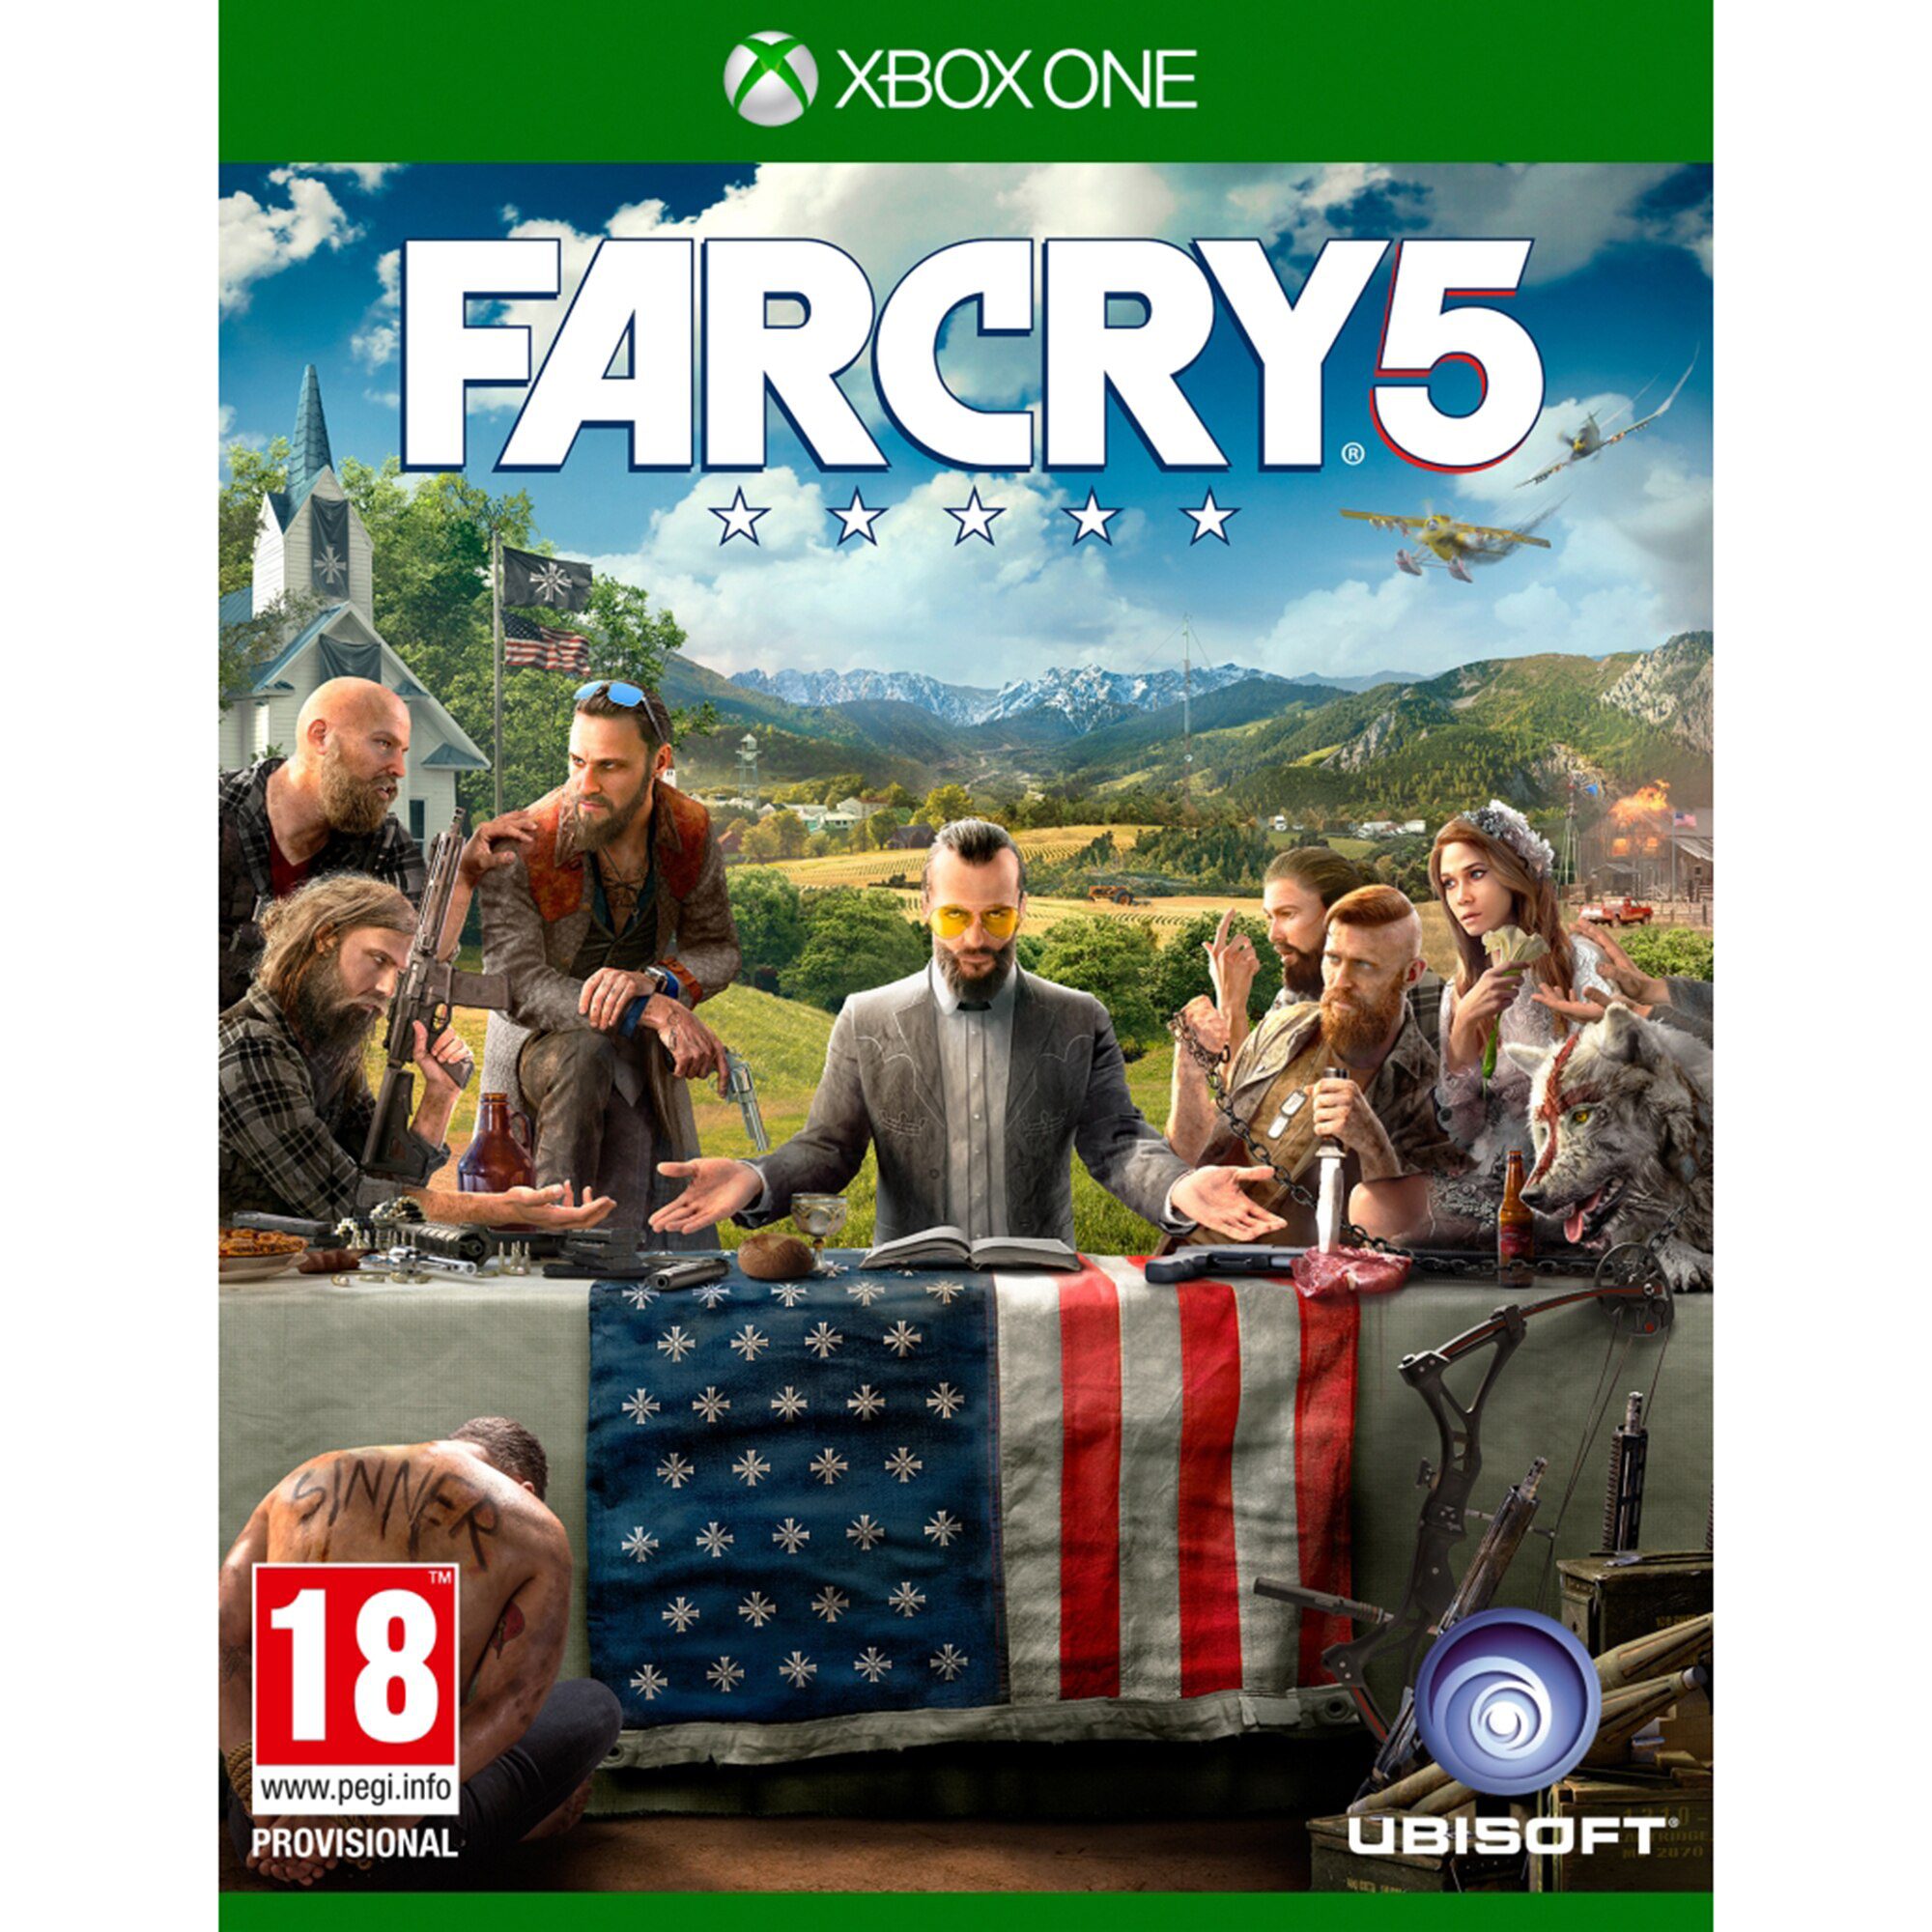 Farcry 5 Xbox One (New)